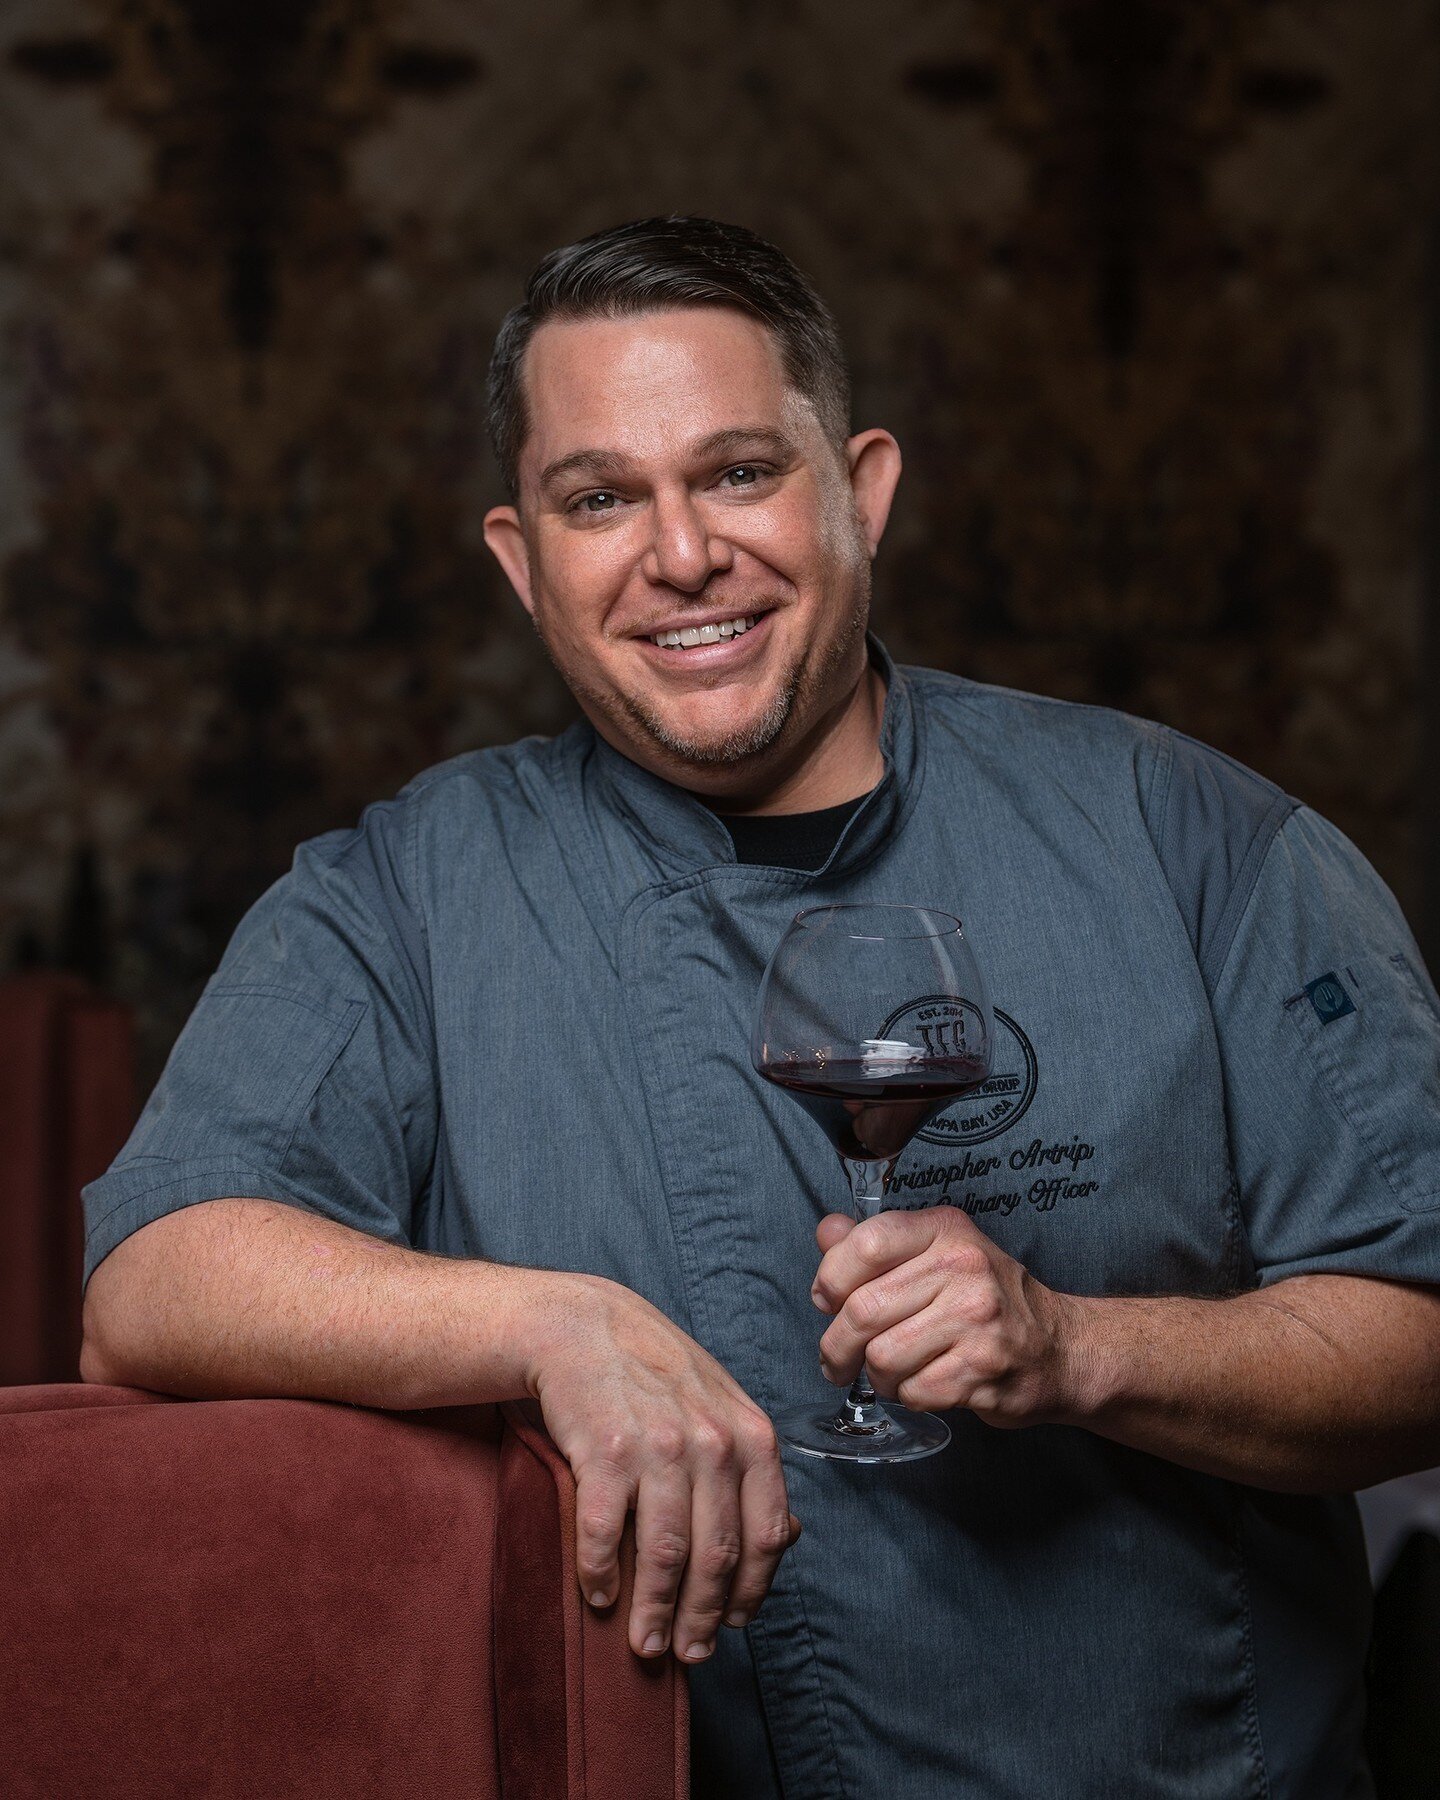 🌟 Meet Chef Chris! 🌟⁠
⁠
He's the heart and soul of our kitchen, bringing 22 years of passion and flavor to every dish. 🍳 When he's not crafting culinary wonders, you'll find him grooving to punk rock tunes 🎸, savoring jammy red wines 🍷, and enjo